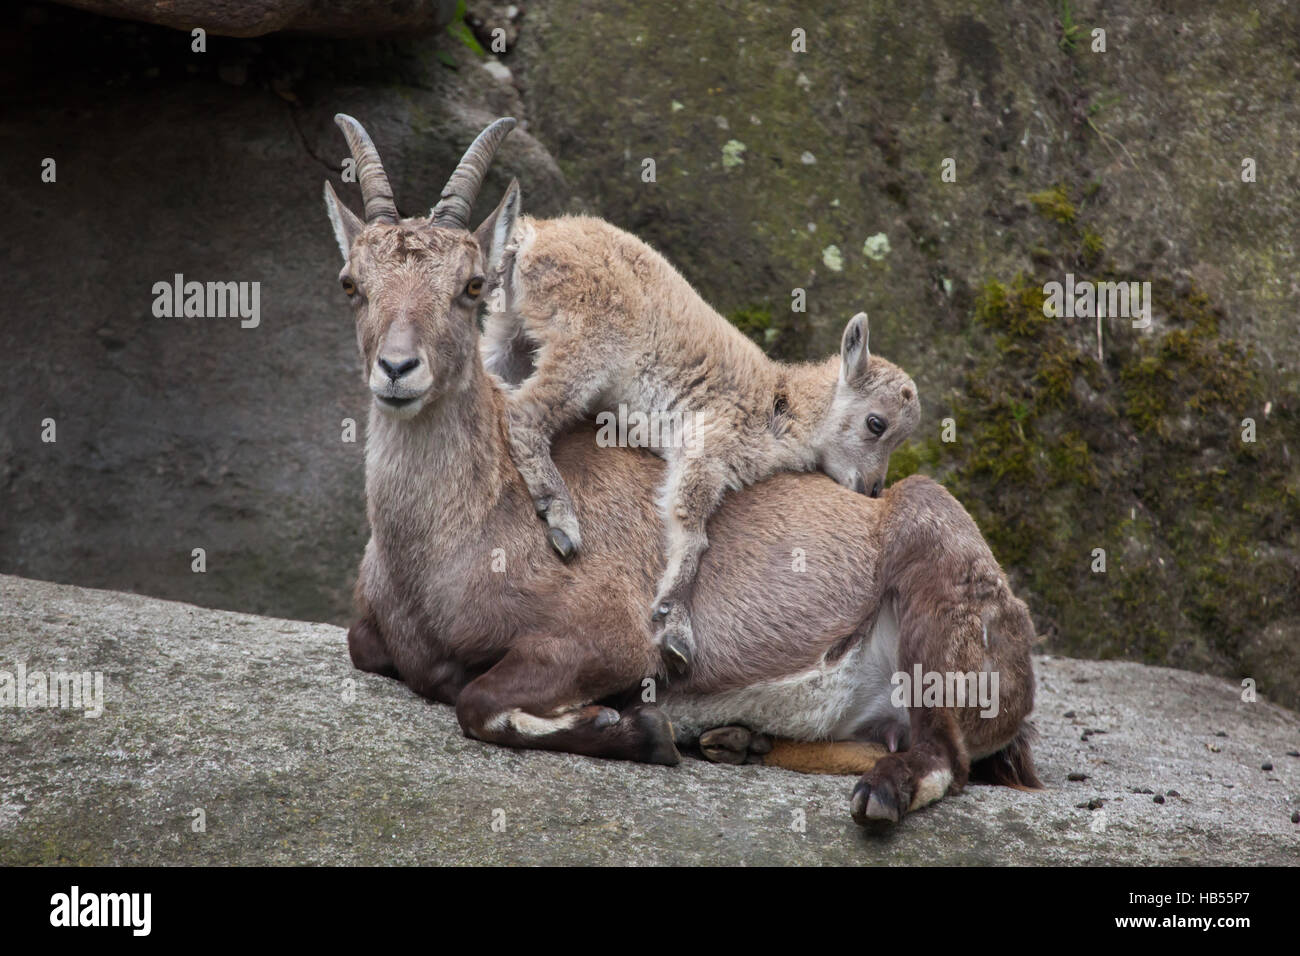 Alpine ibex (Capra ibex ibex), also known as the steinbock or bouquetin. Ibex kid playing with its mother at Hellabrunn Zoo in Munich, Bavaria, German Stock Photo